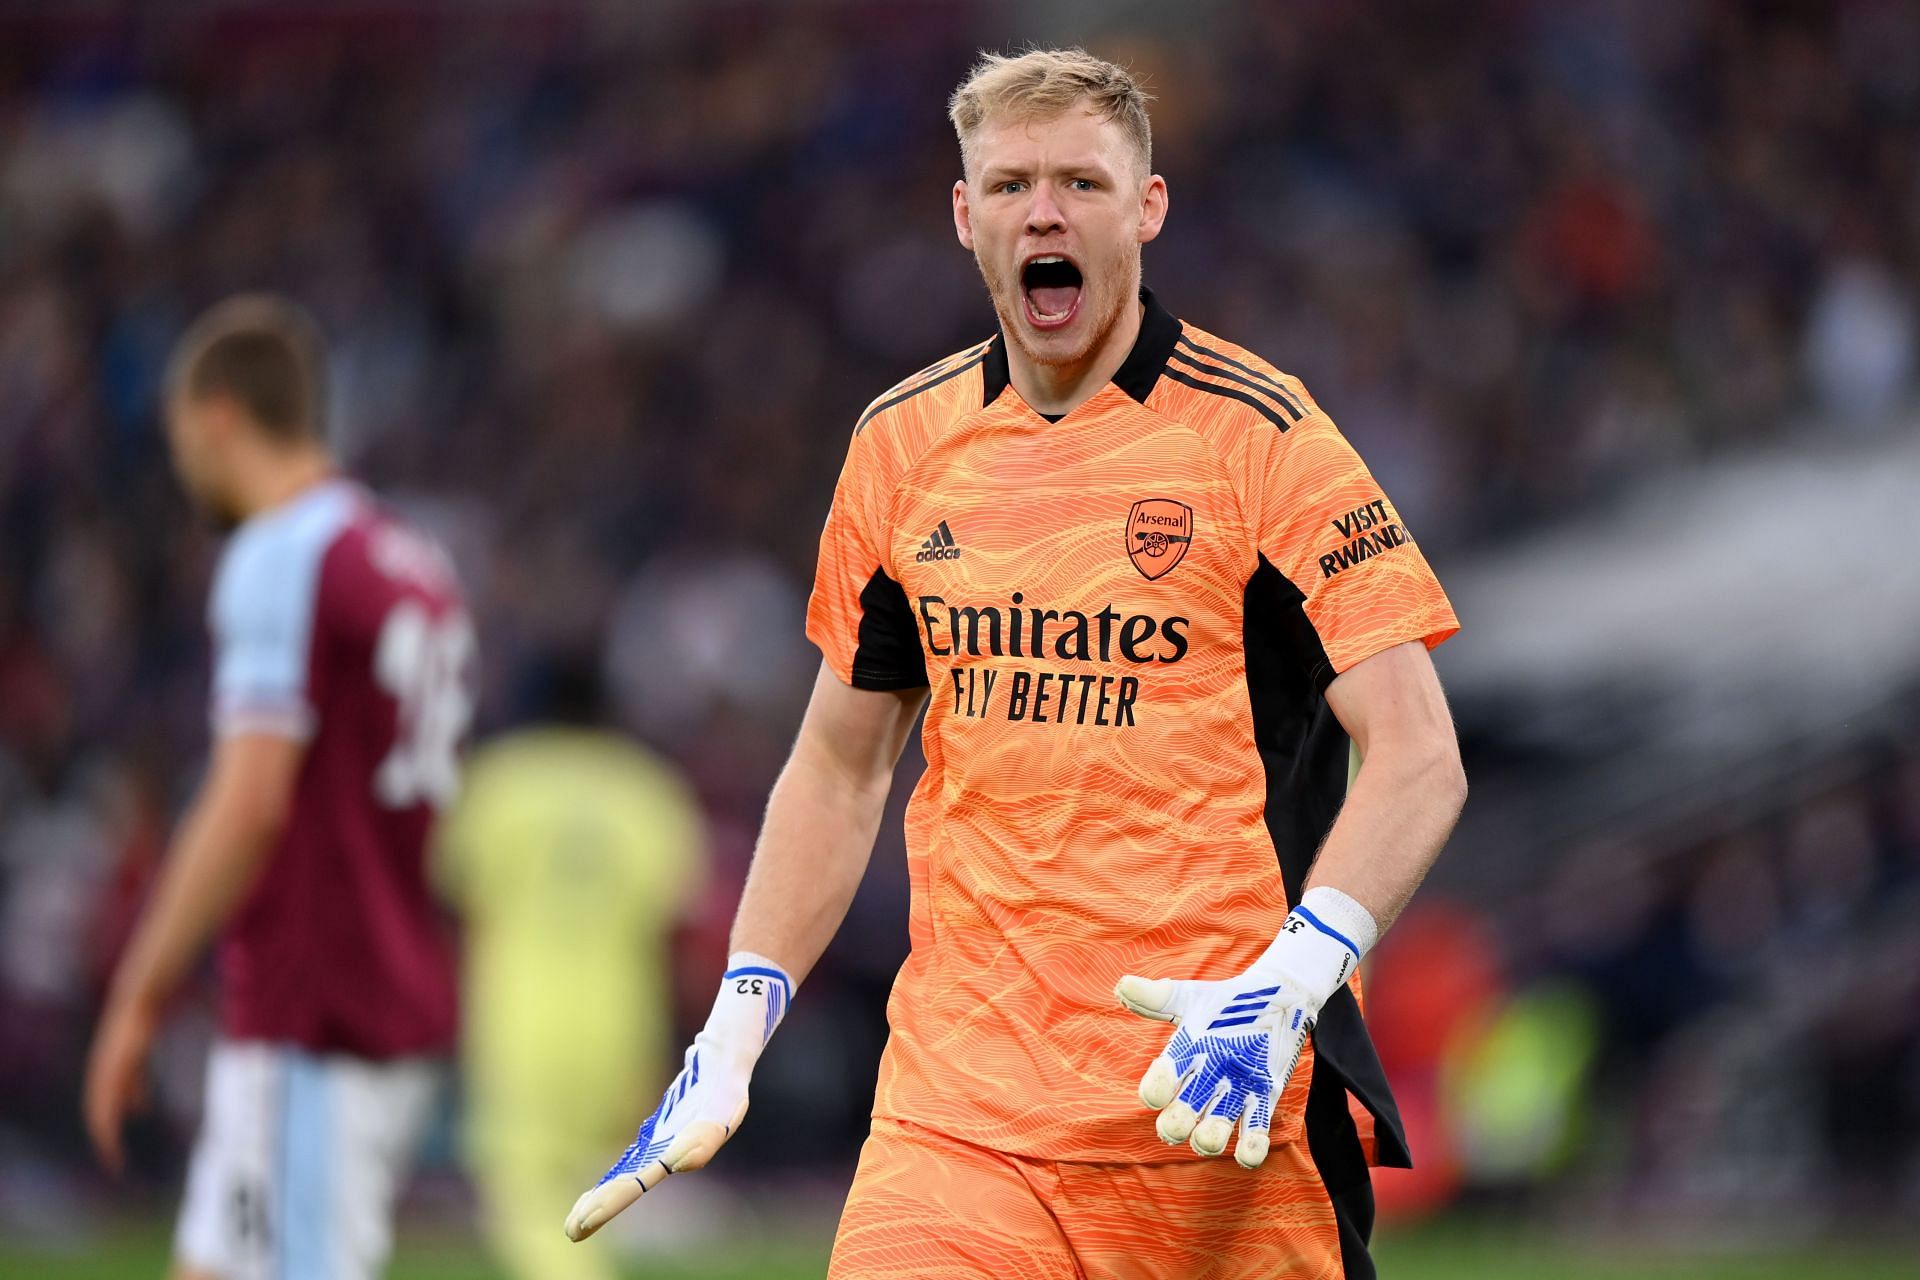 The goalkeeper has surpassed expectations at the Emirates Stadium this season